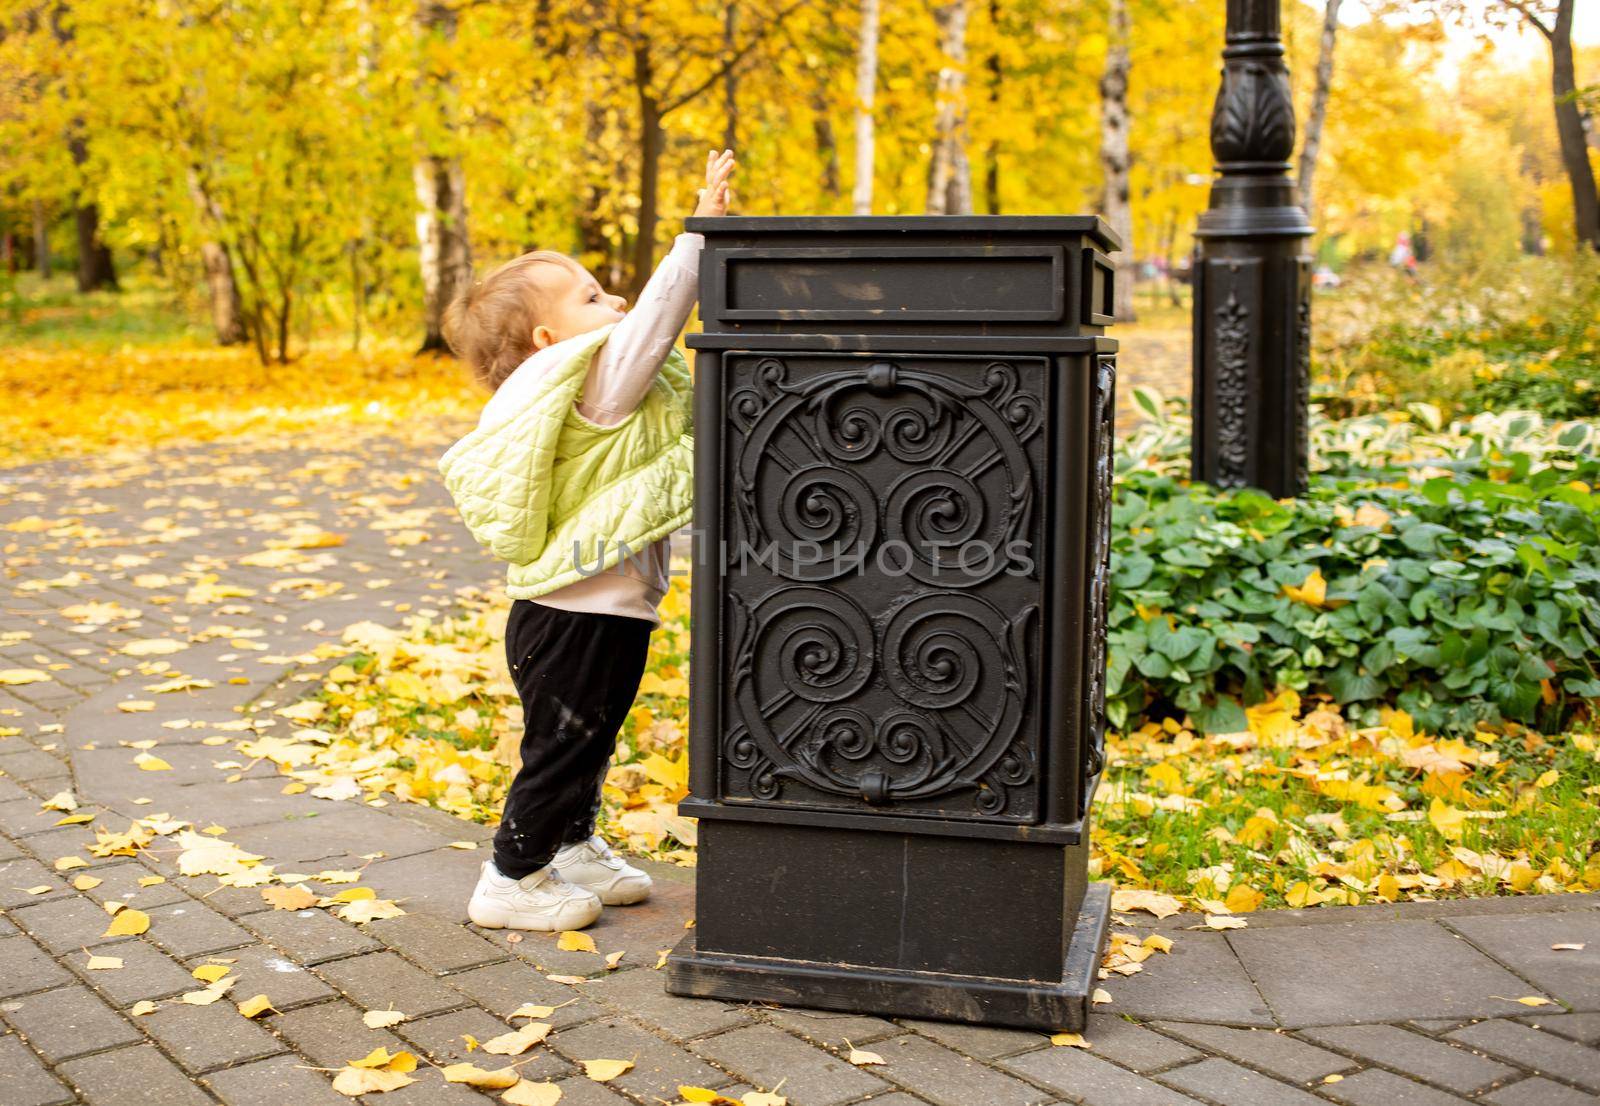 cute little baby throws trash into trash can in autumn park. instilling cultural norms from birth by Mariaprovector